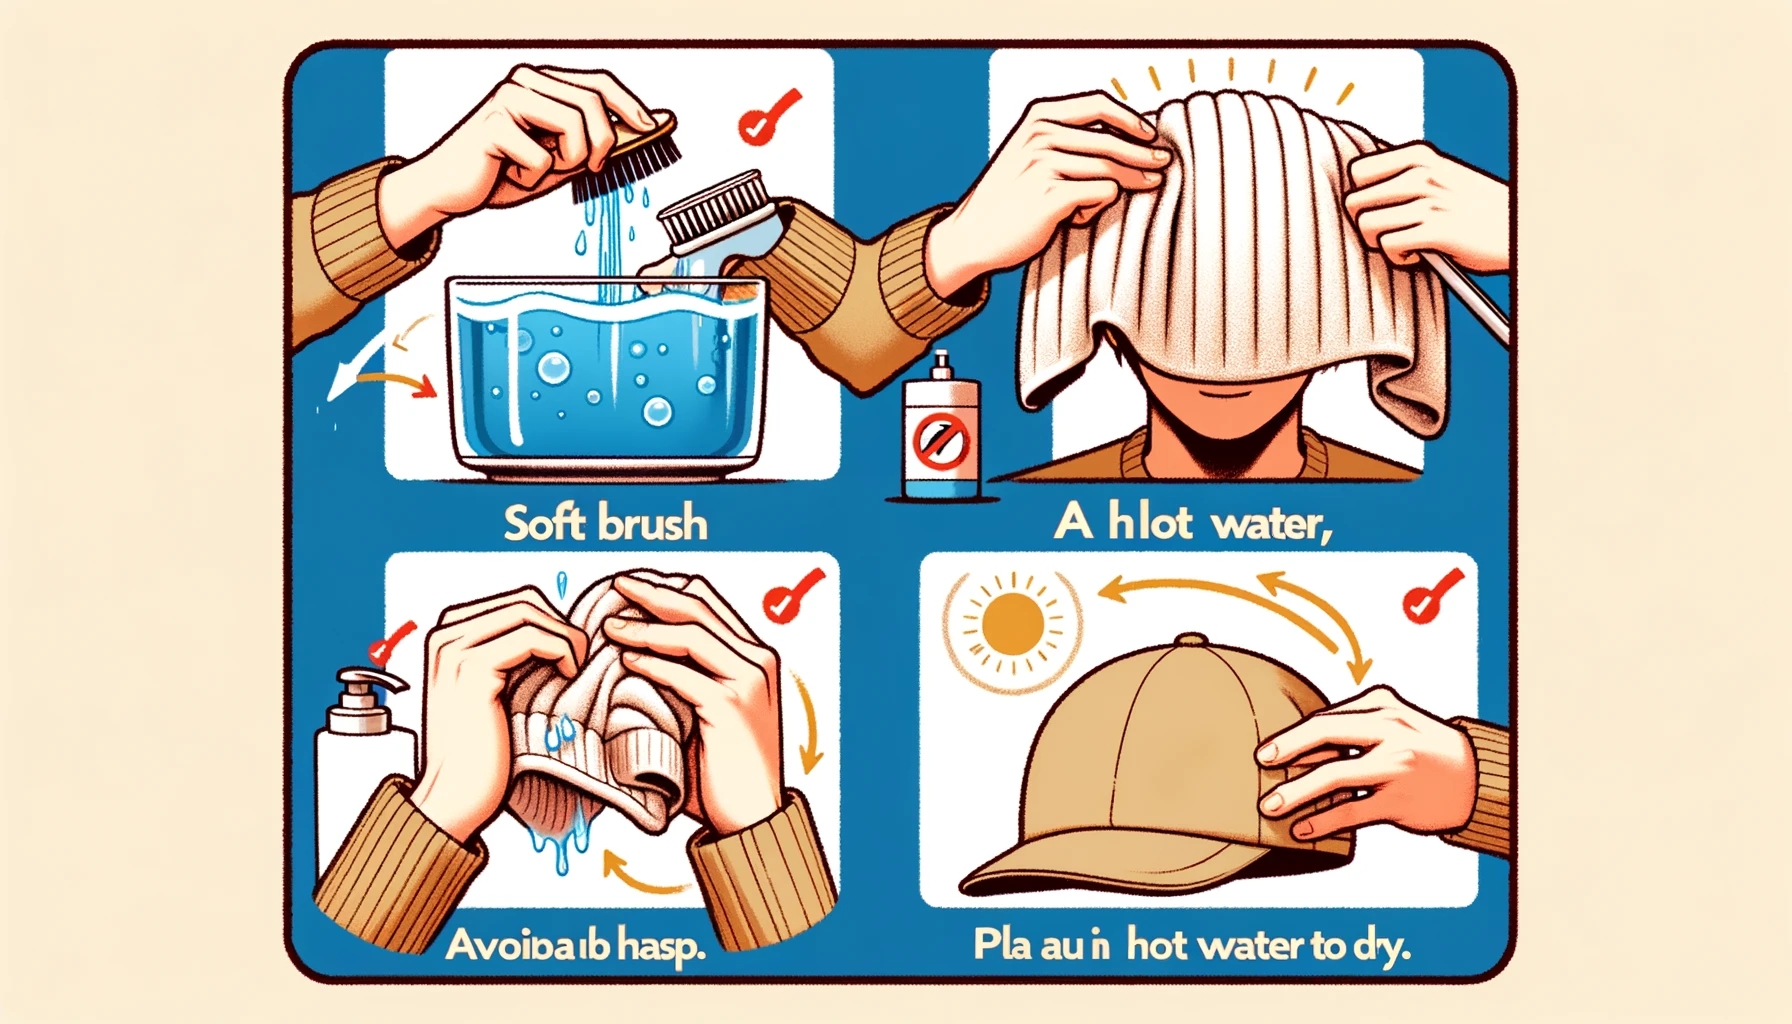 A Japanese person demonstrating tips for washing a cap: using a soft brush, avoiding hot water, and placing the cap on a towel to dry, with visual emphasis on each tip.